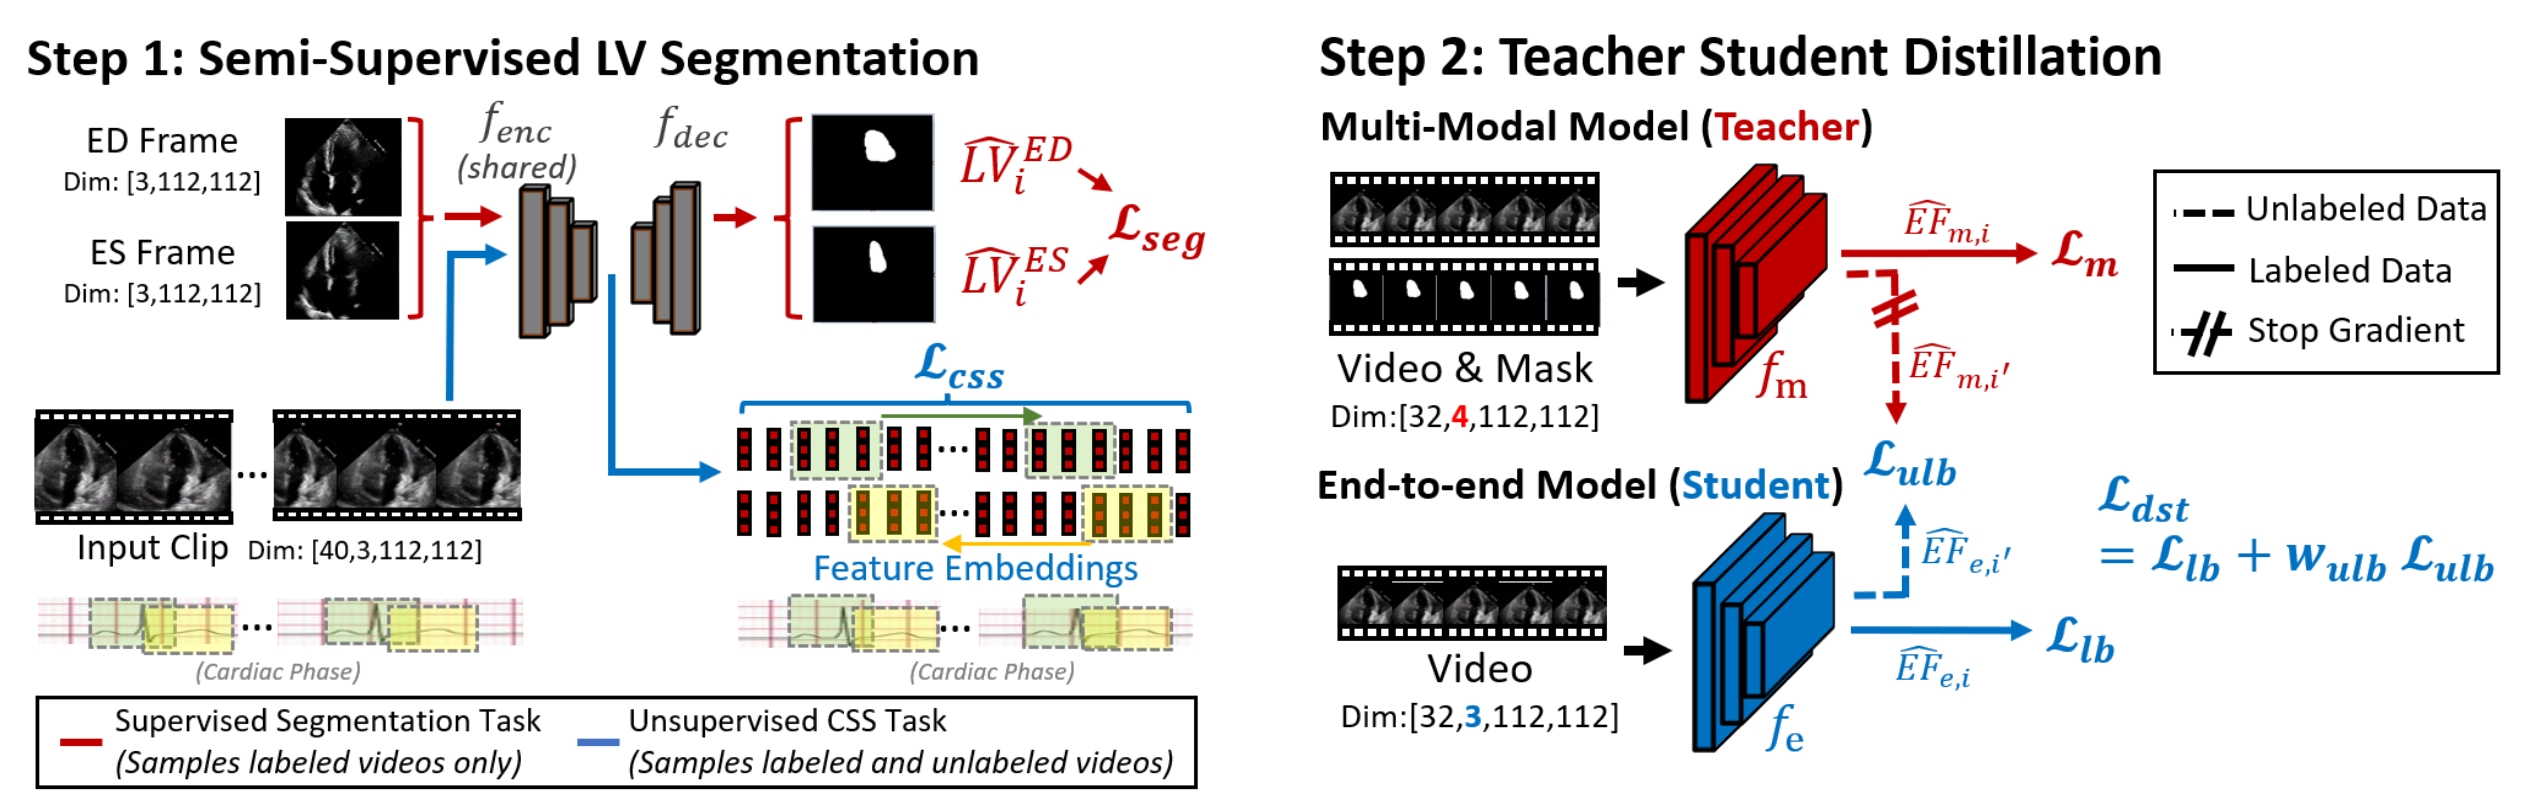 Cyclical Self-Supervision for Semi-Supervised Ejection Fraction Prediction From Echocardiogram Videos